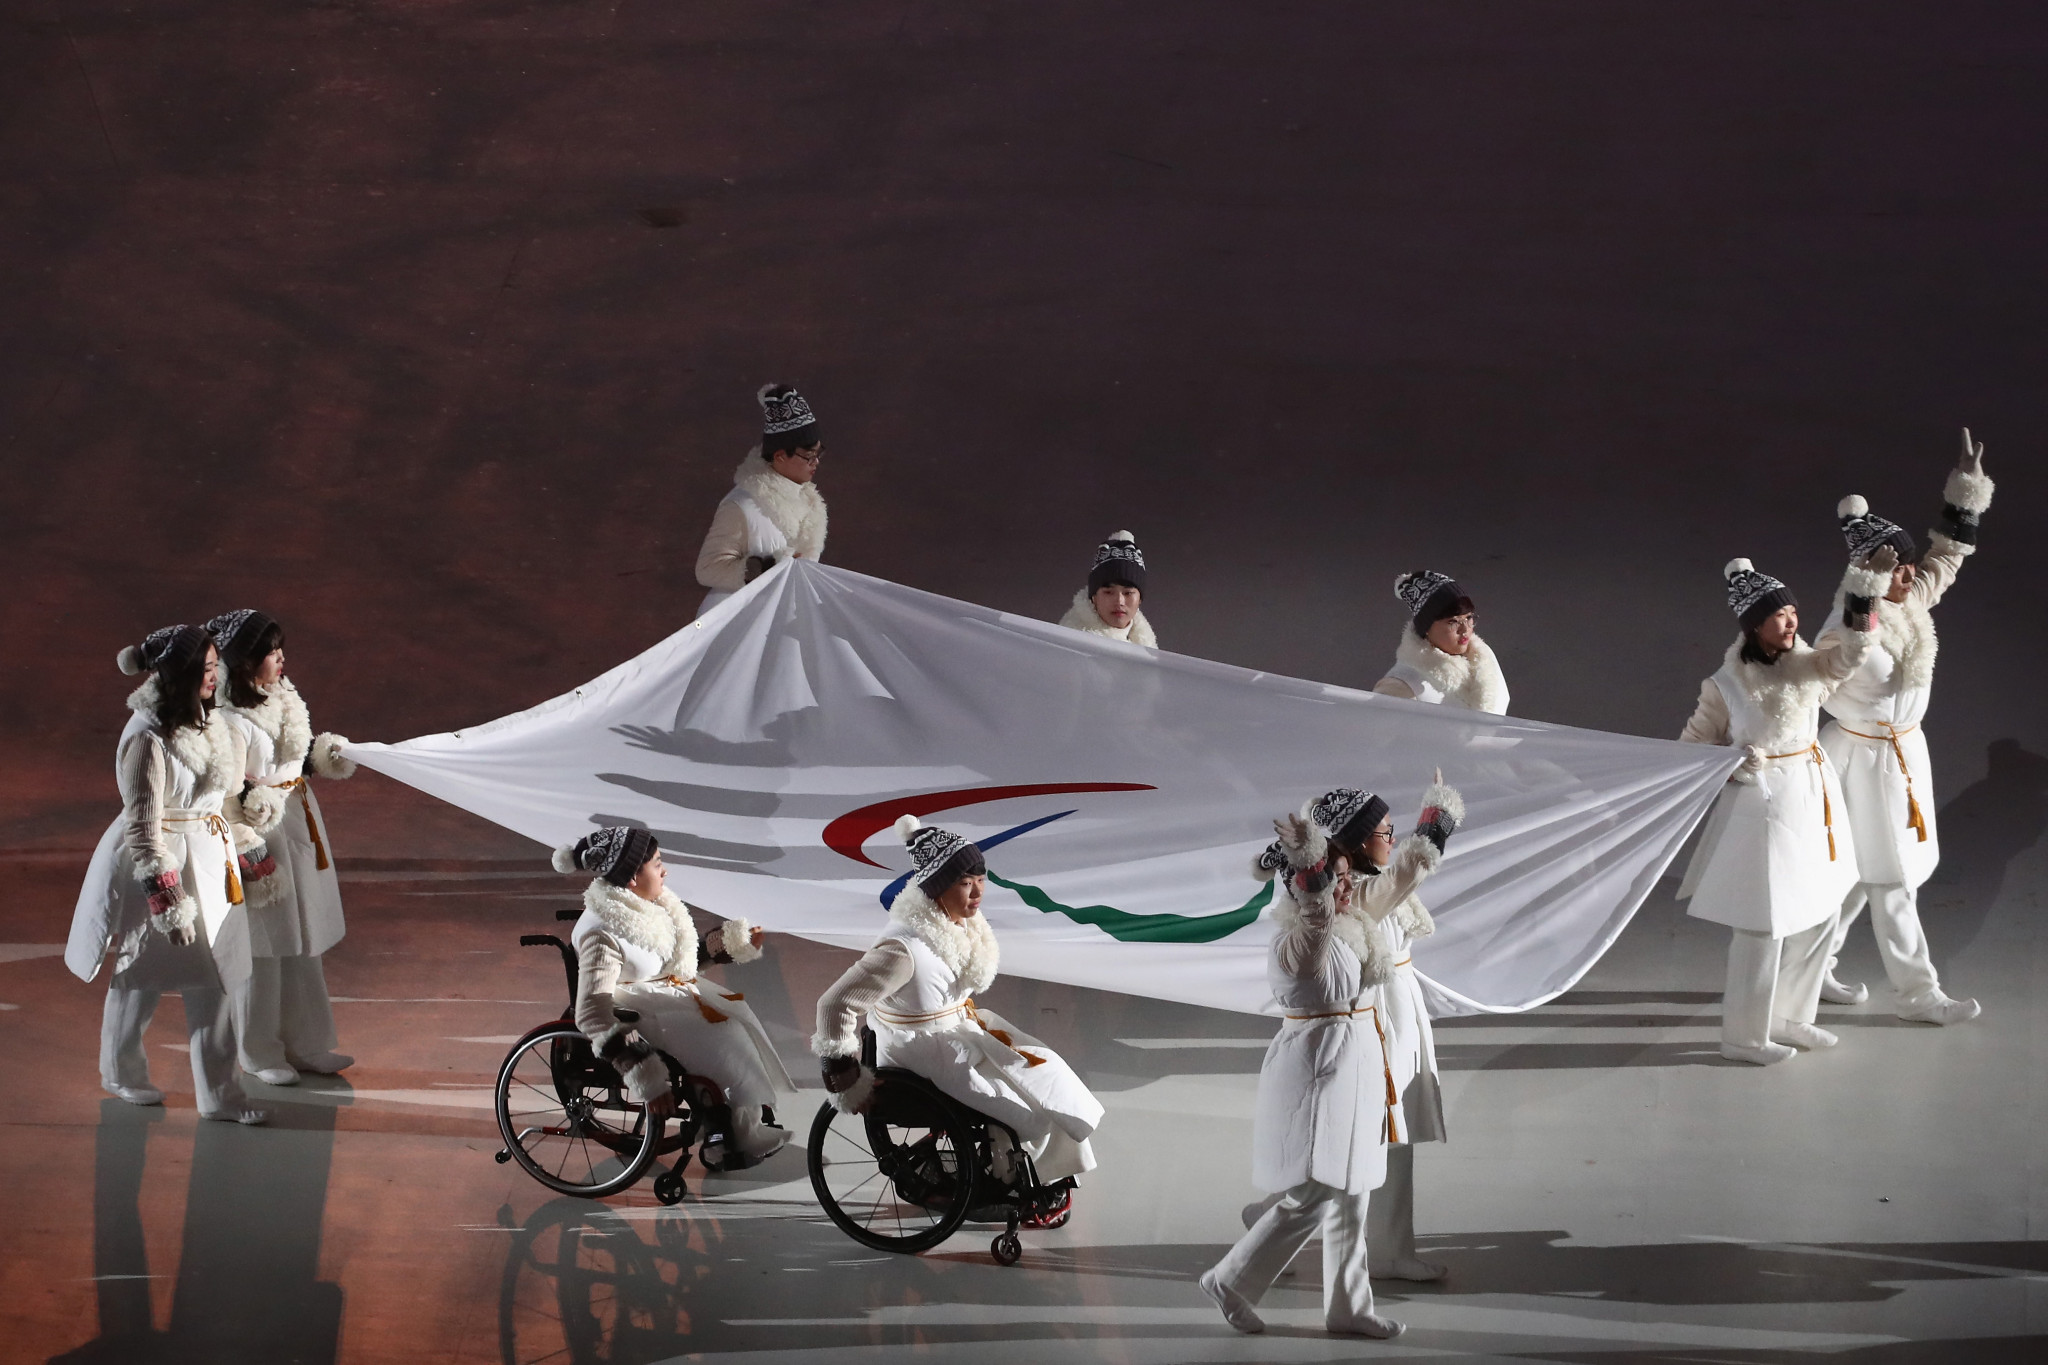 Promising future Paralympians brought the Paralympic flag into the Pyeongchang Olympic Stadium ©Getty Images